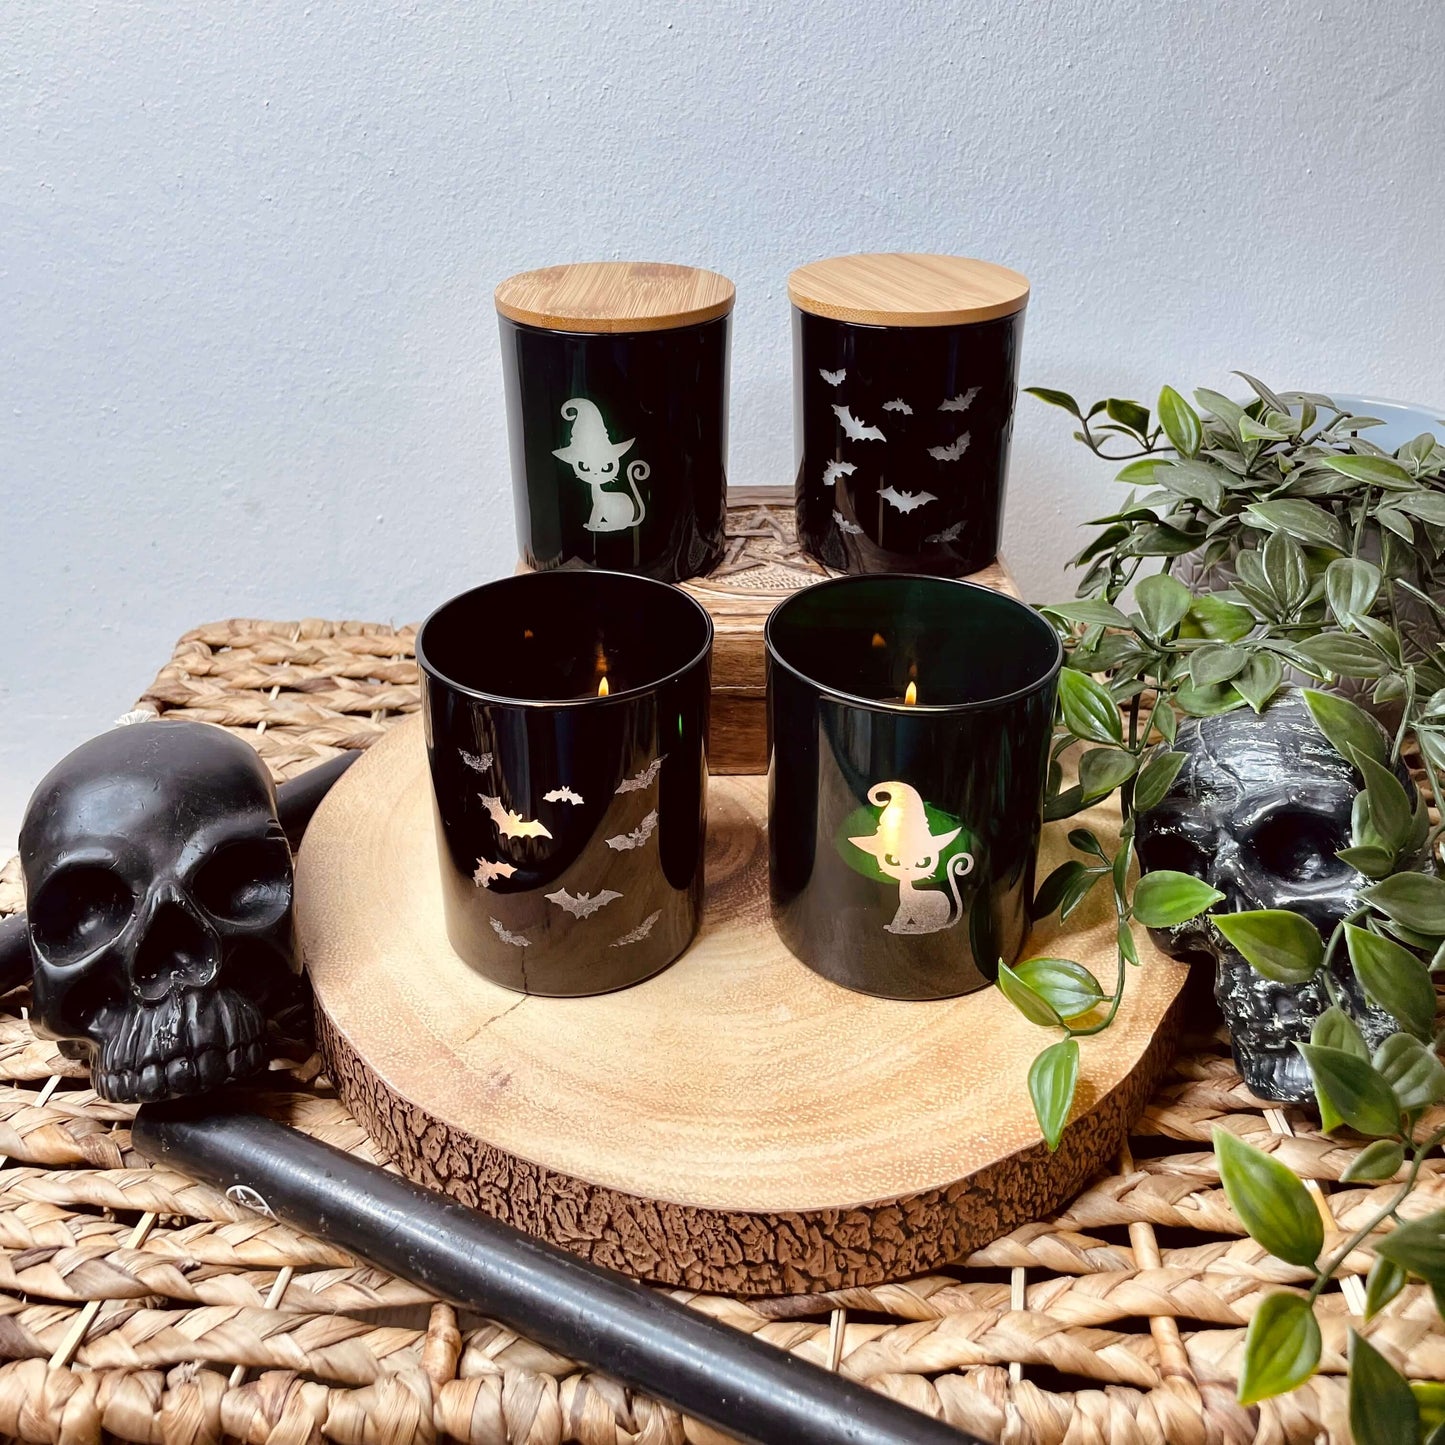 Green Witch Cat and Black Bats engraved candle jars. Green & Black with a wood wick and bamboo lids. Medium size, handmade from soy wax. 